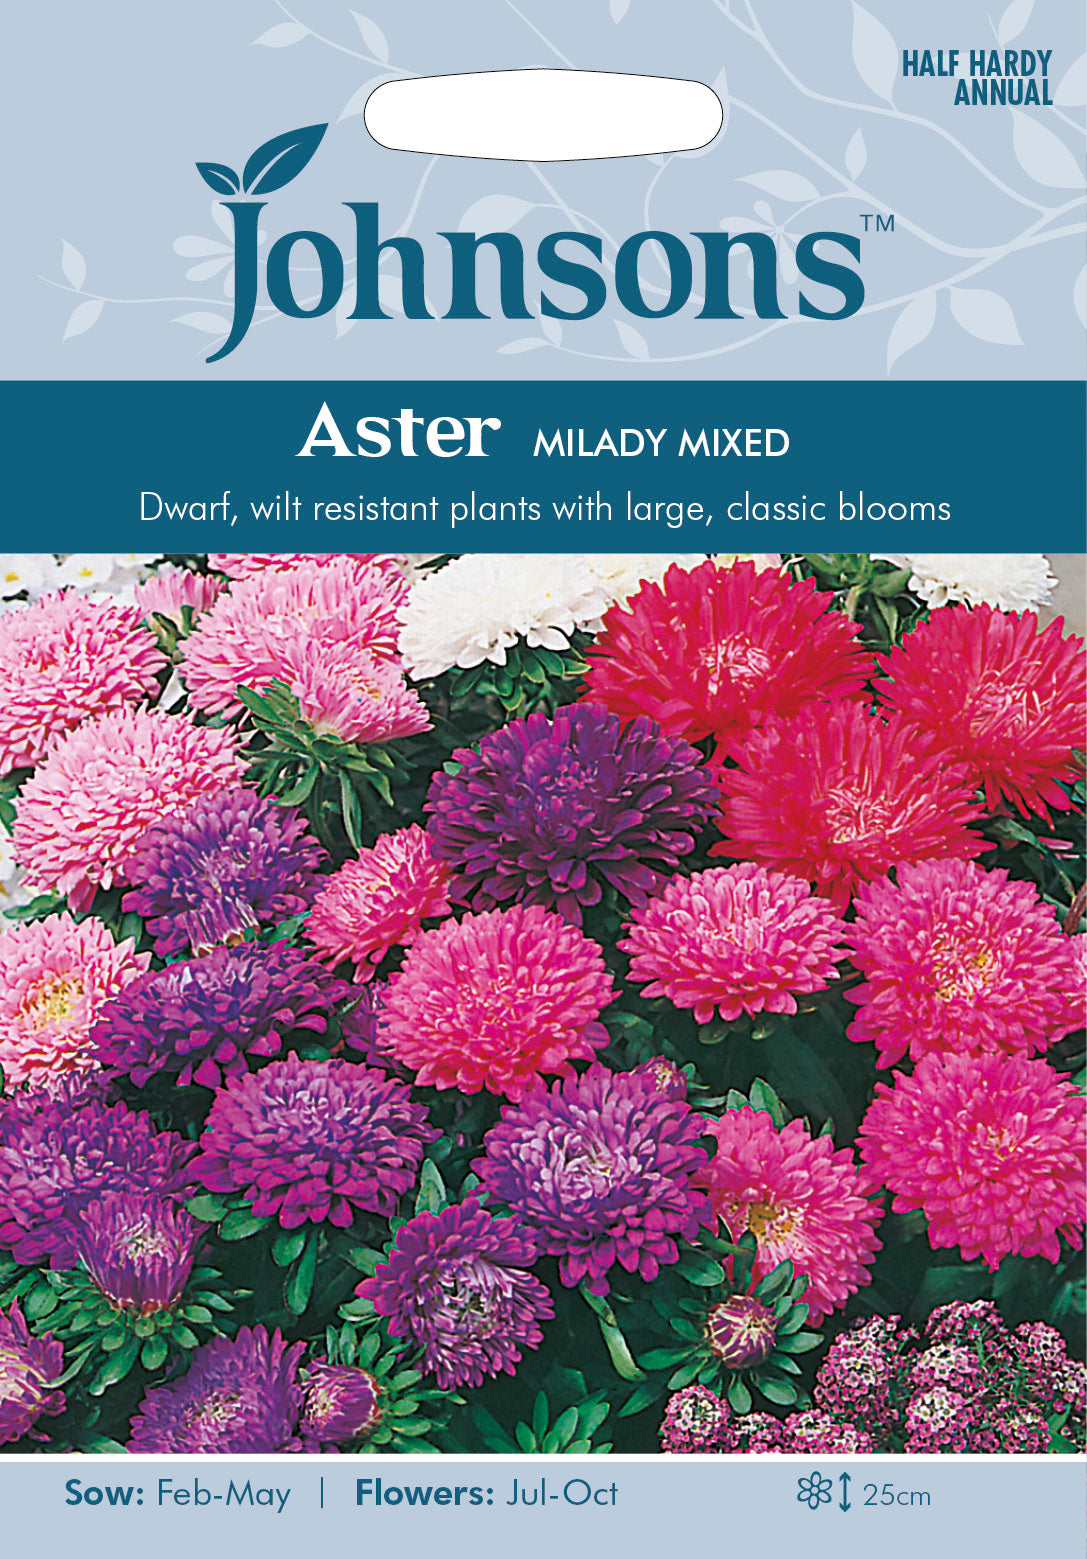 ASTER Milady Mixed